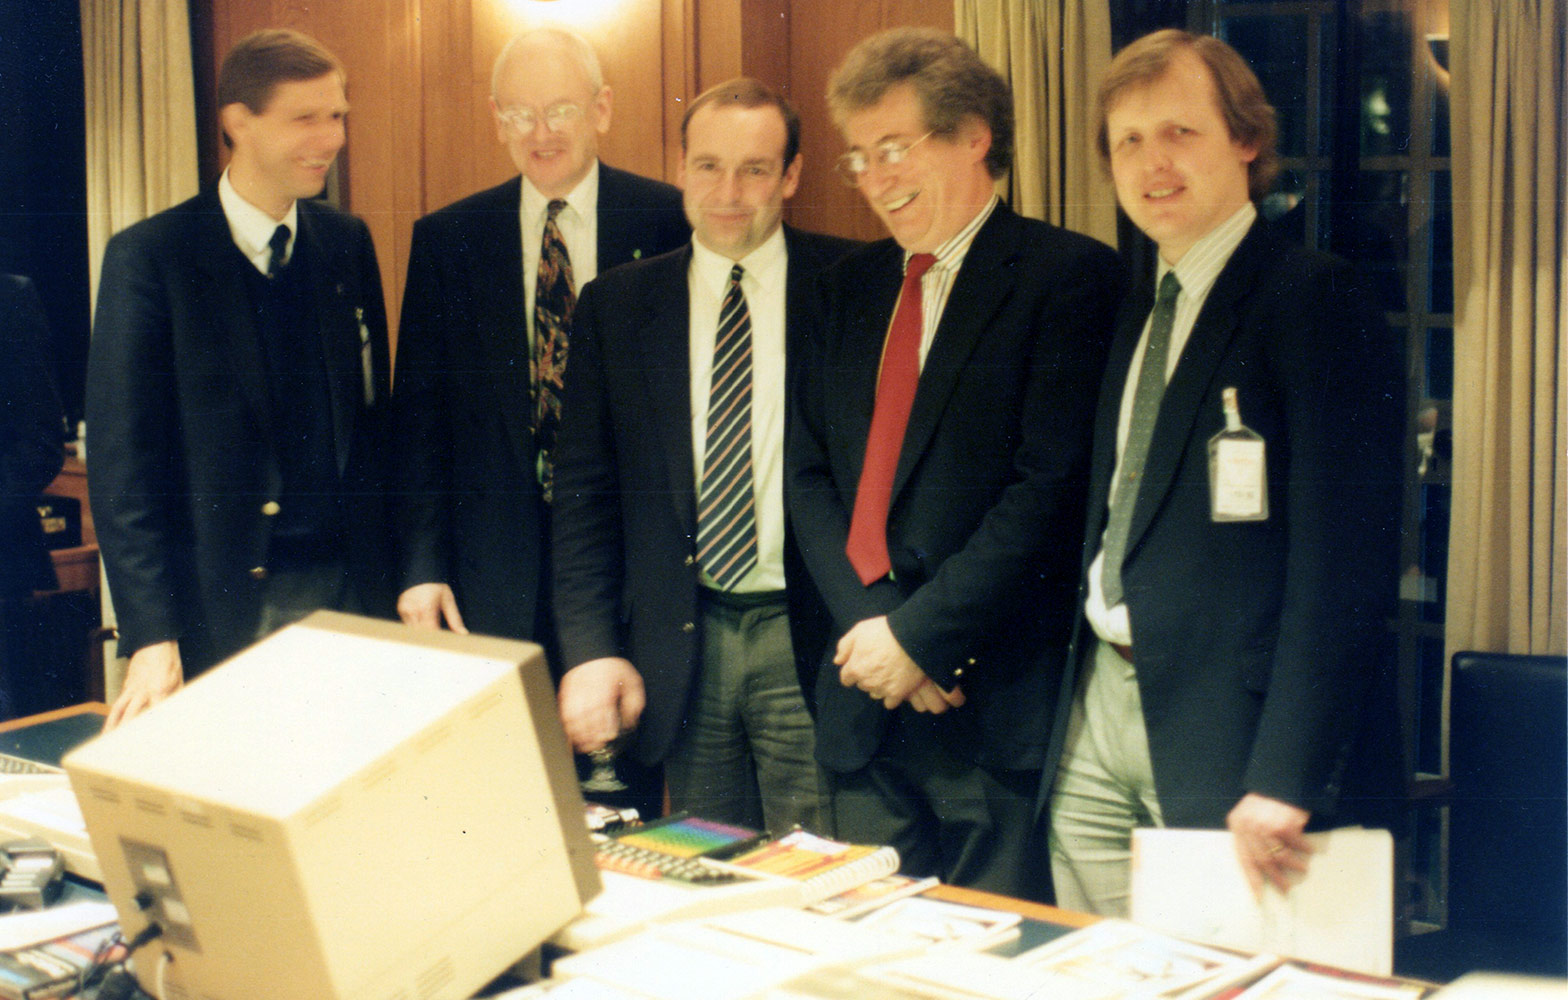 Launch of the BBC Micro